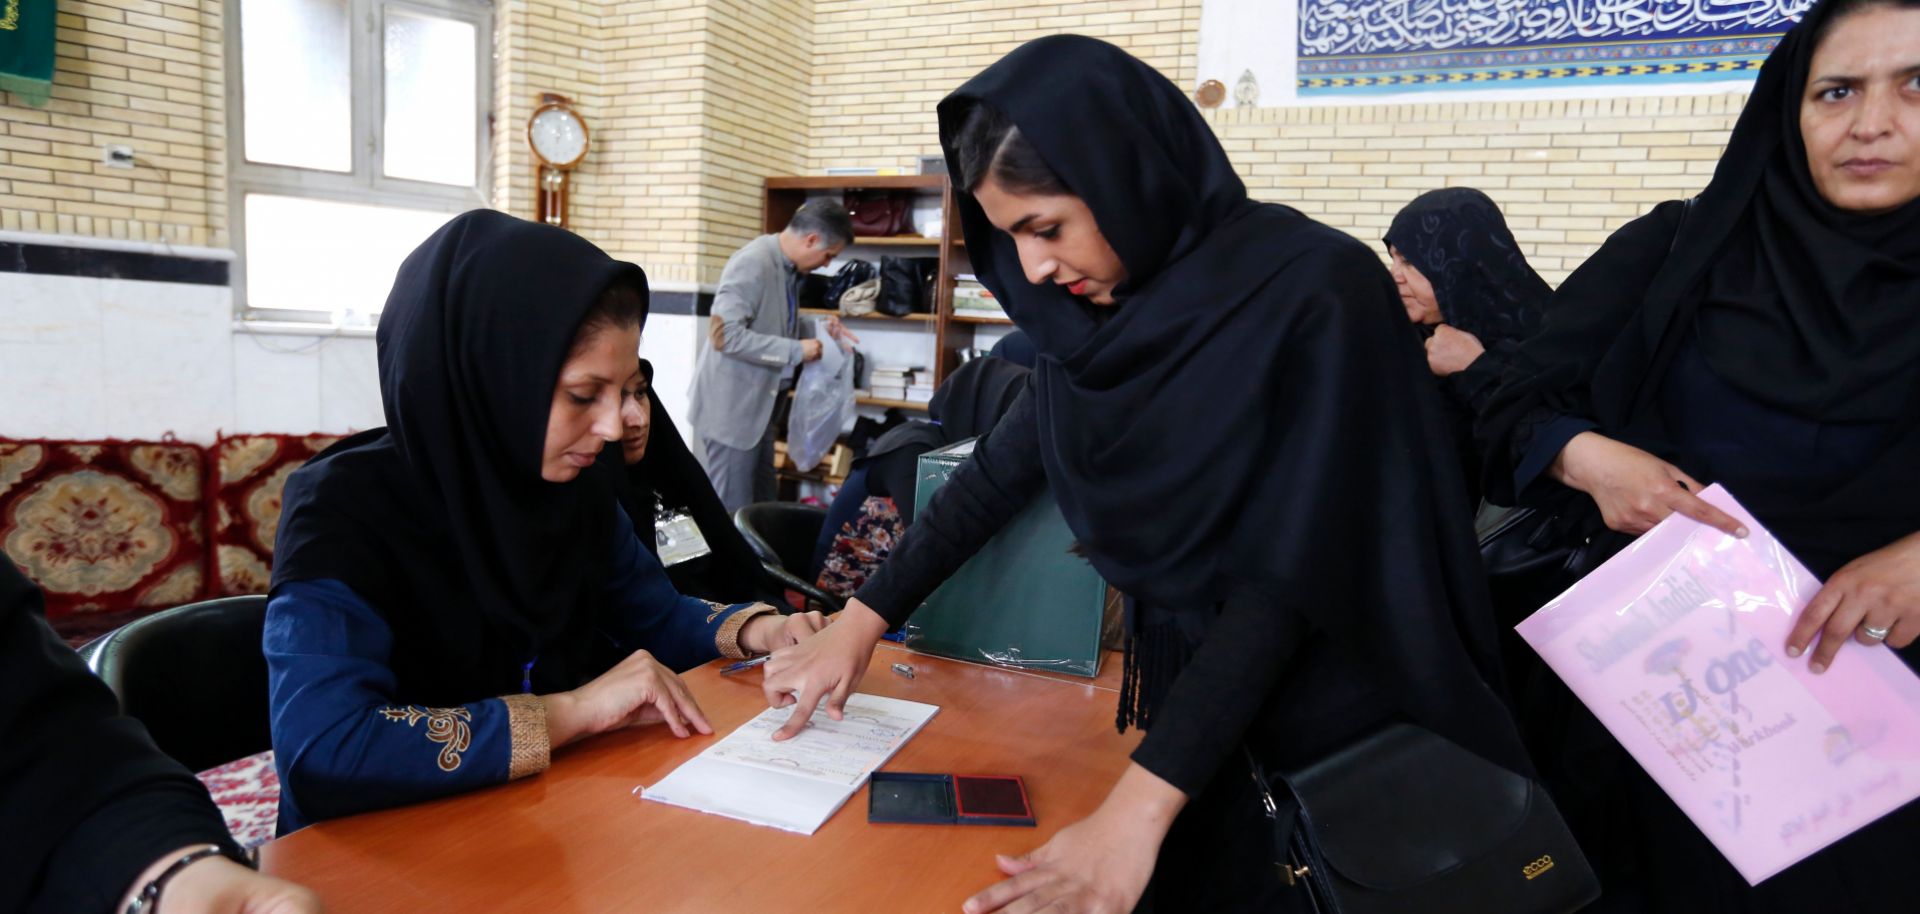 This photo shows a woman voting in Iran's 2016 parliamentary elections.